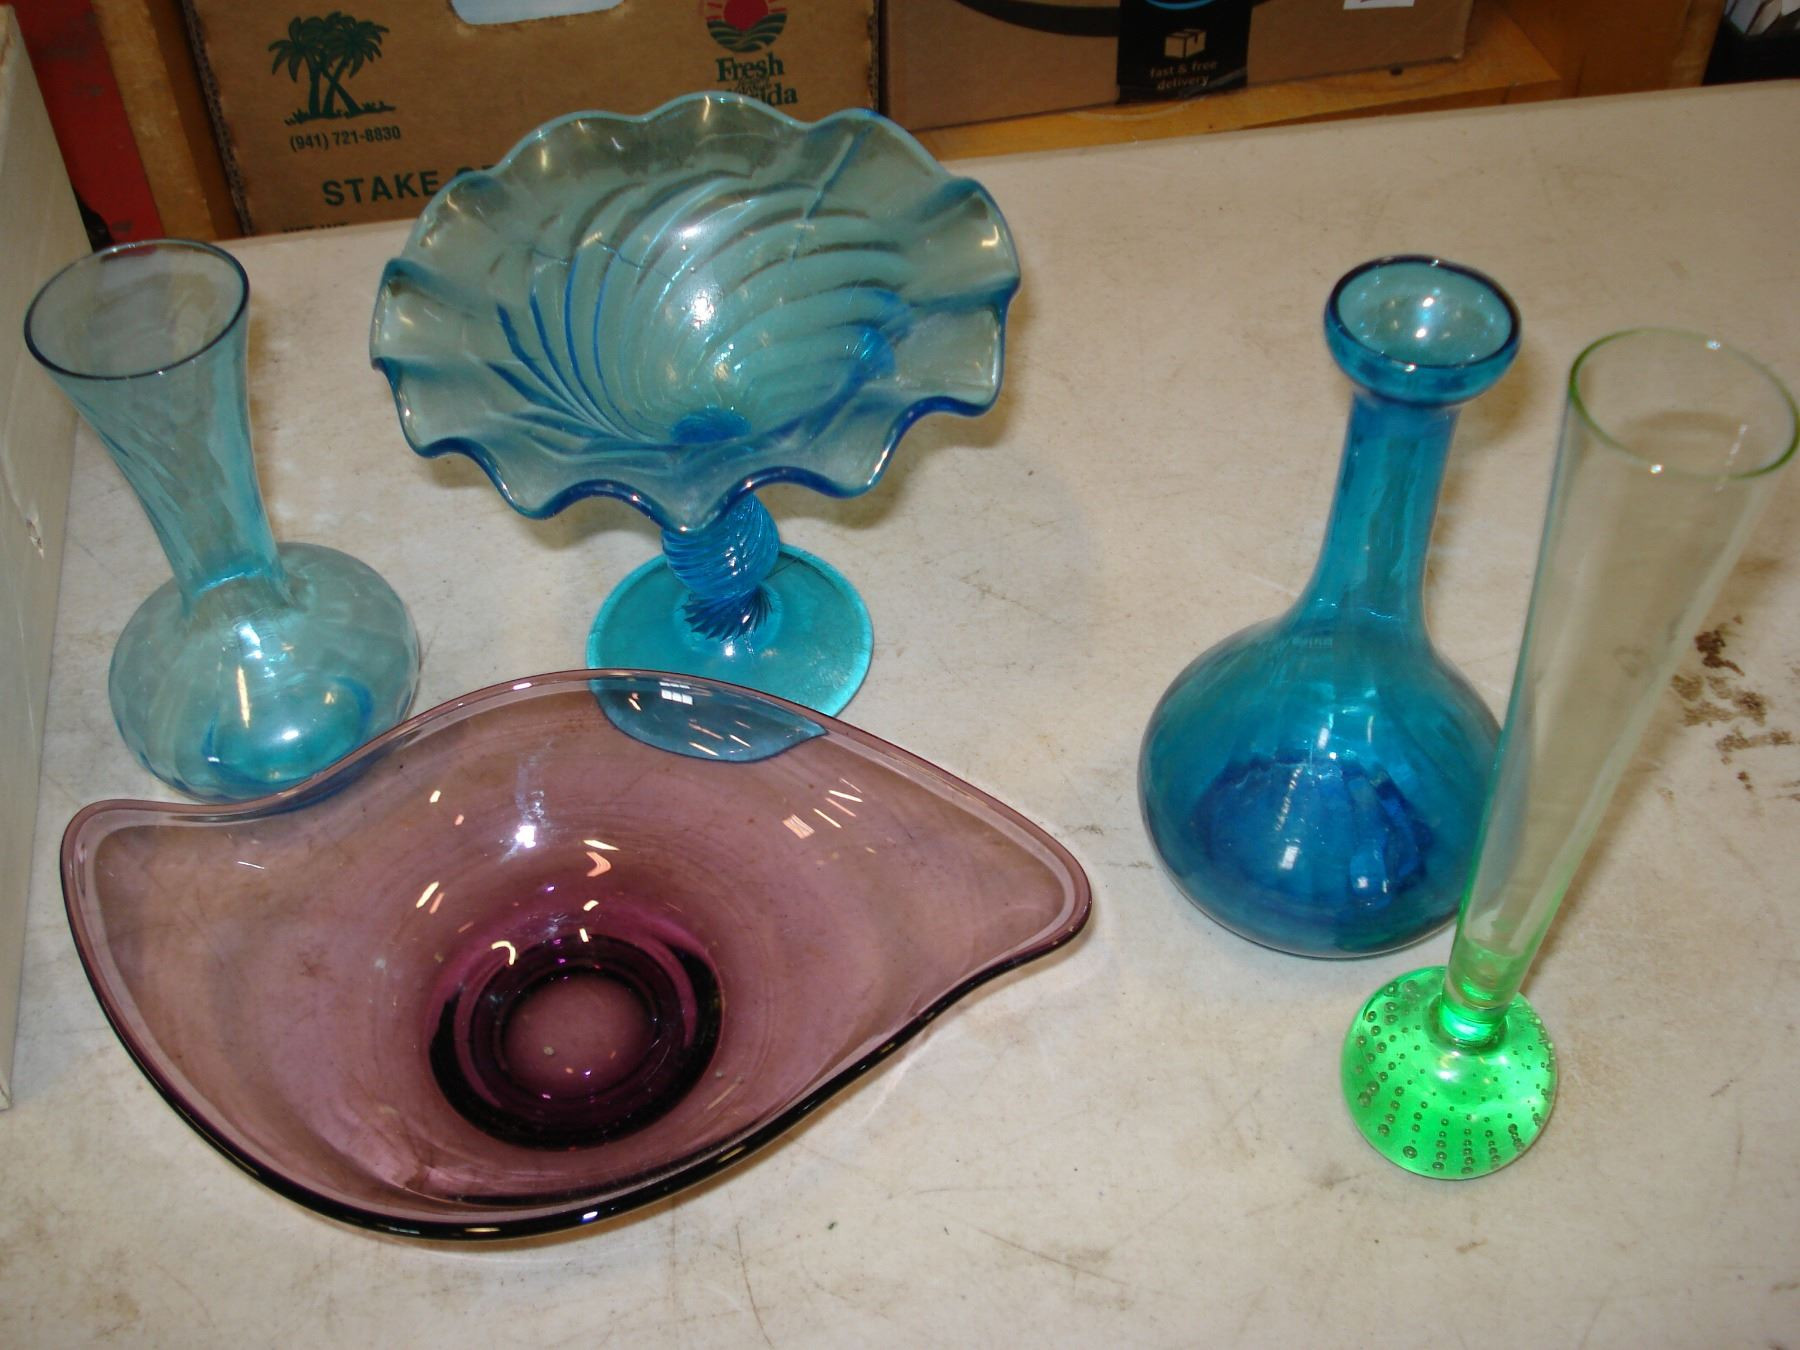 blue glass vases cheap of lot of colored glass vases dishes and glasses intended for image 2 lot of colored glass vases dishes and glasses